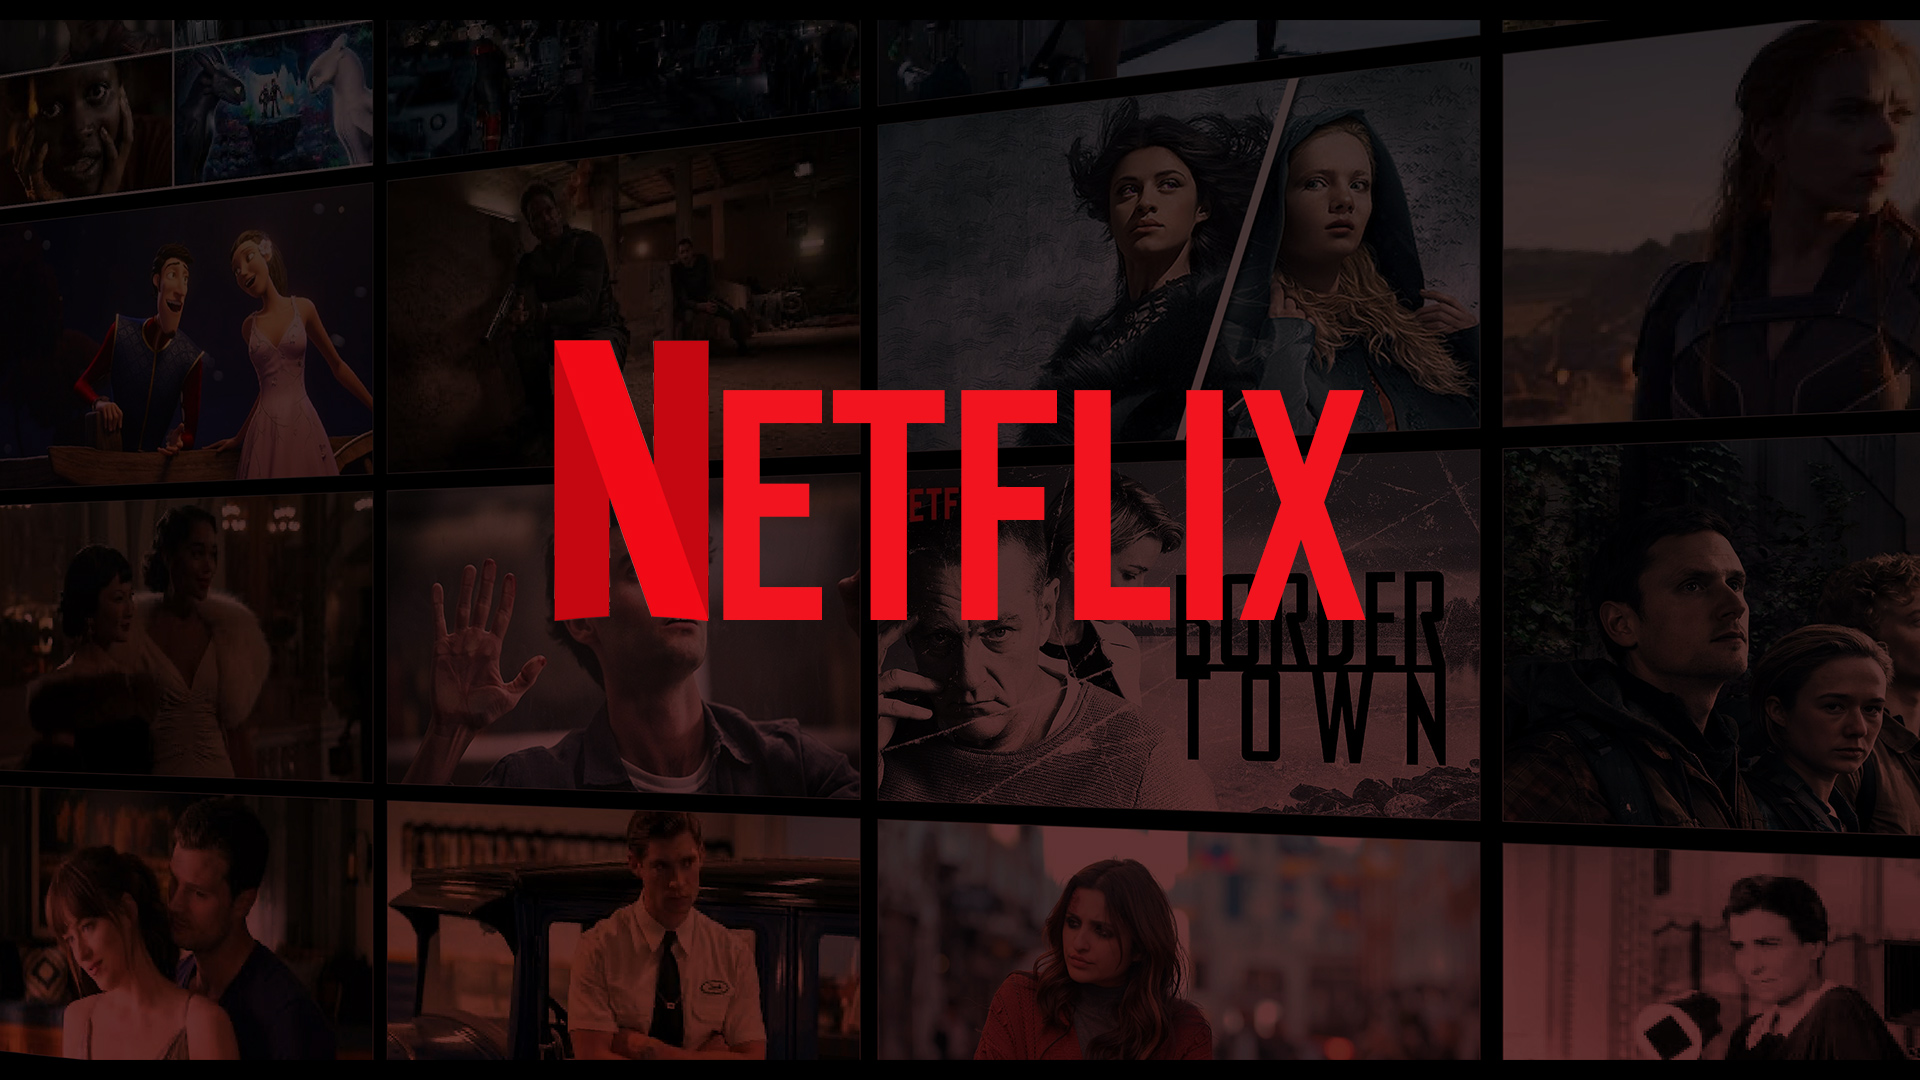 How To Pitch Your Film Or Tv Show To Netflix?